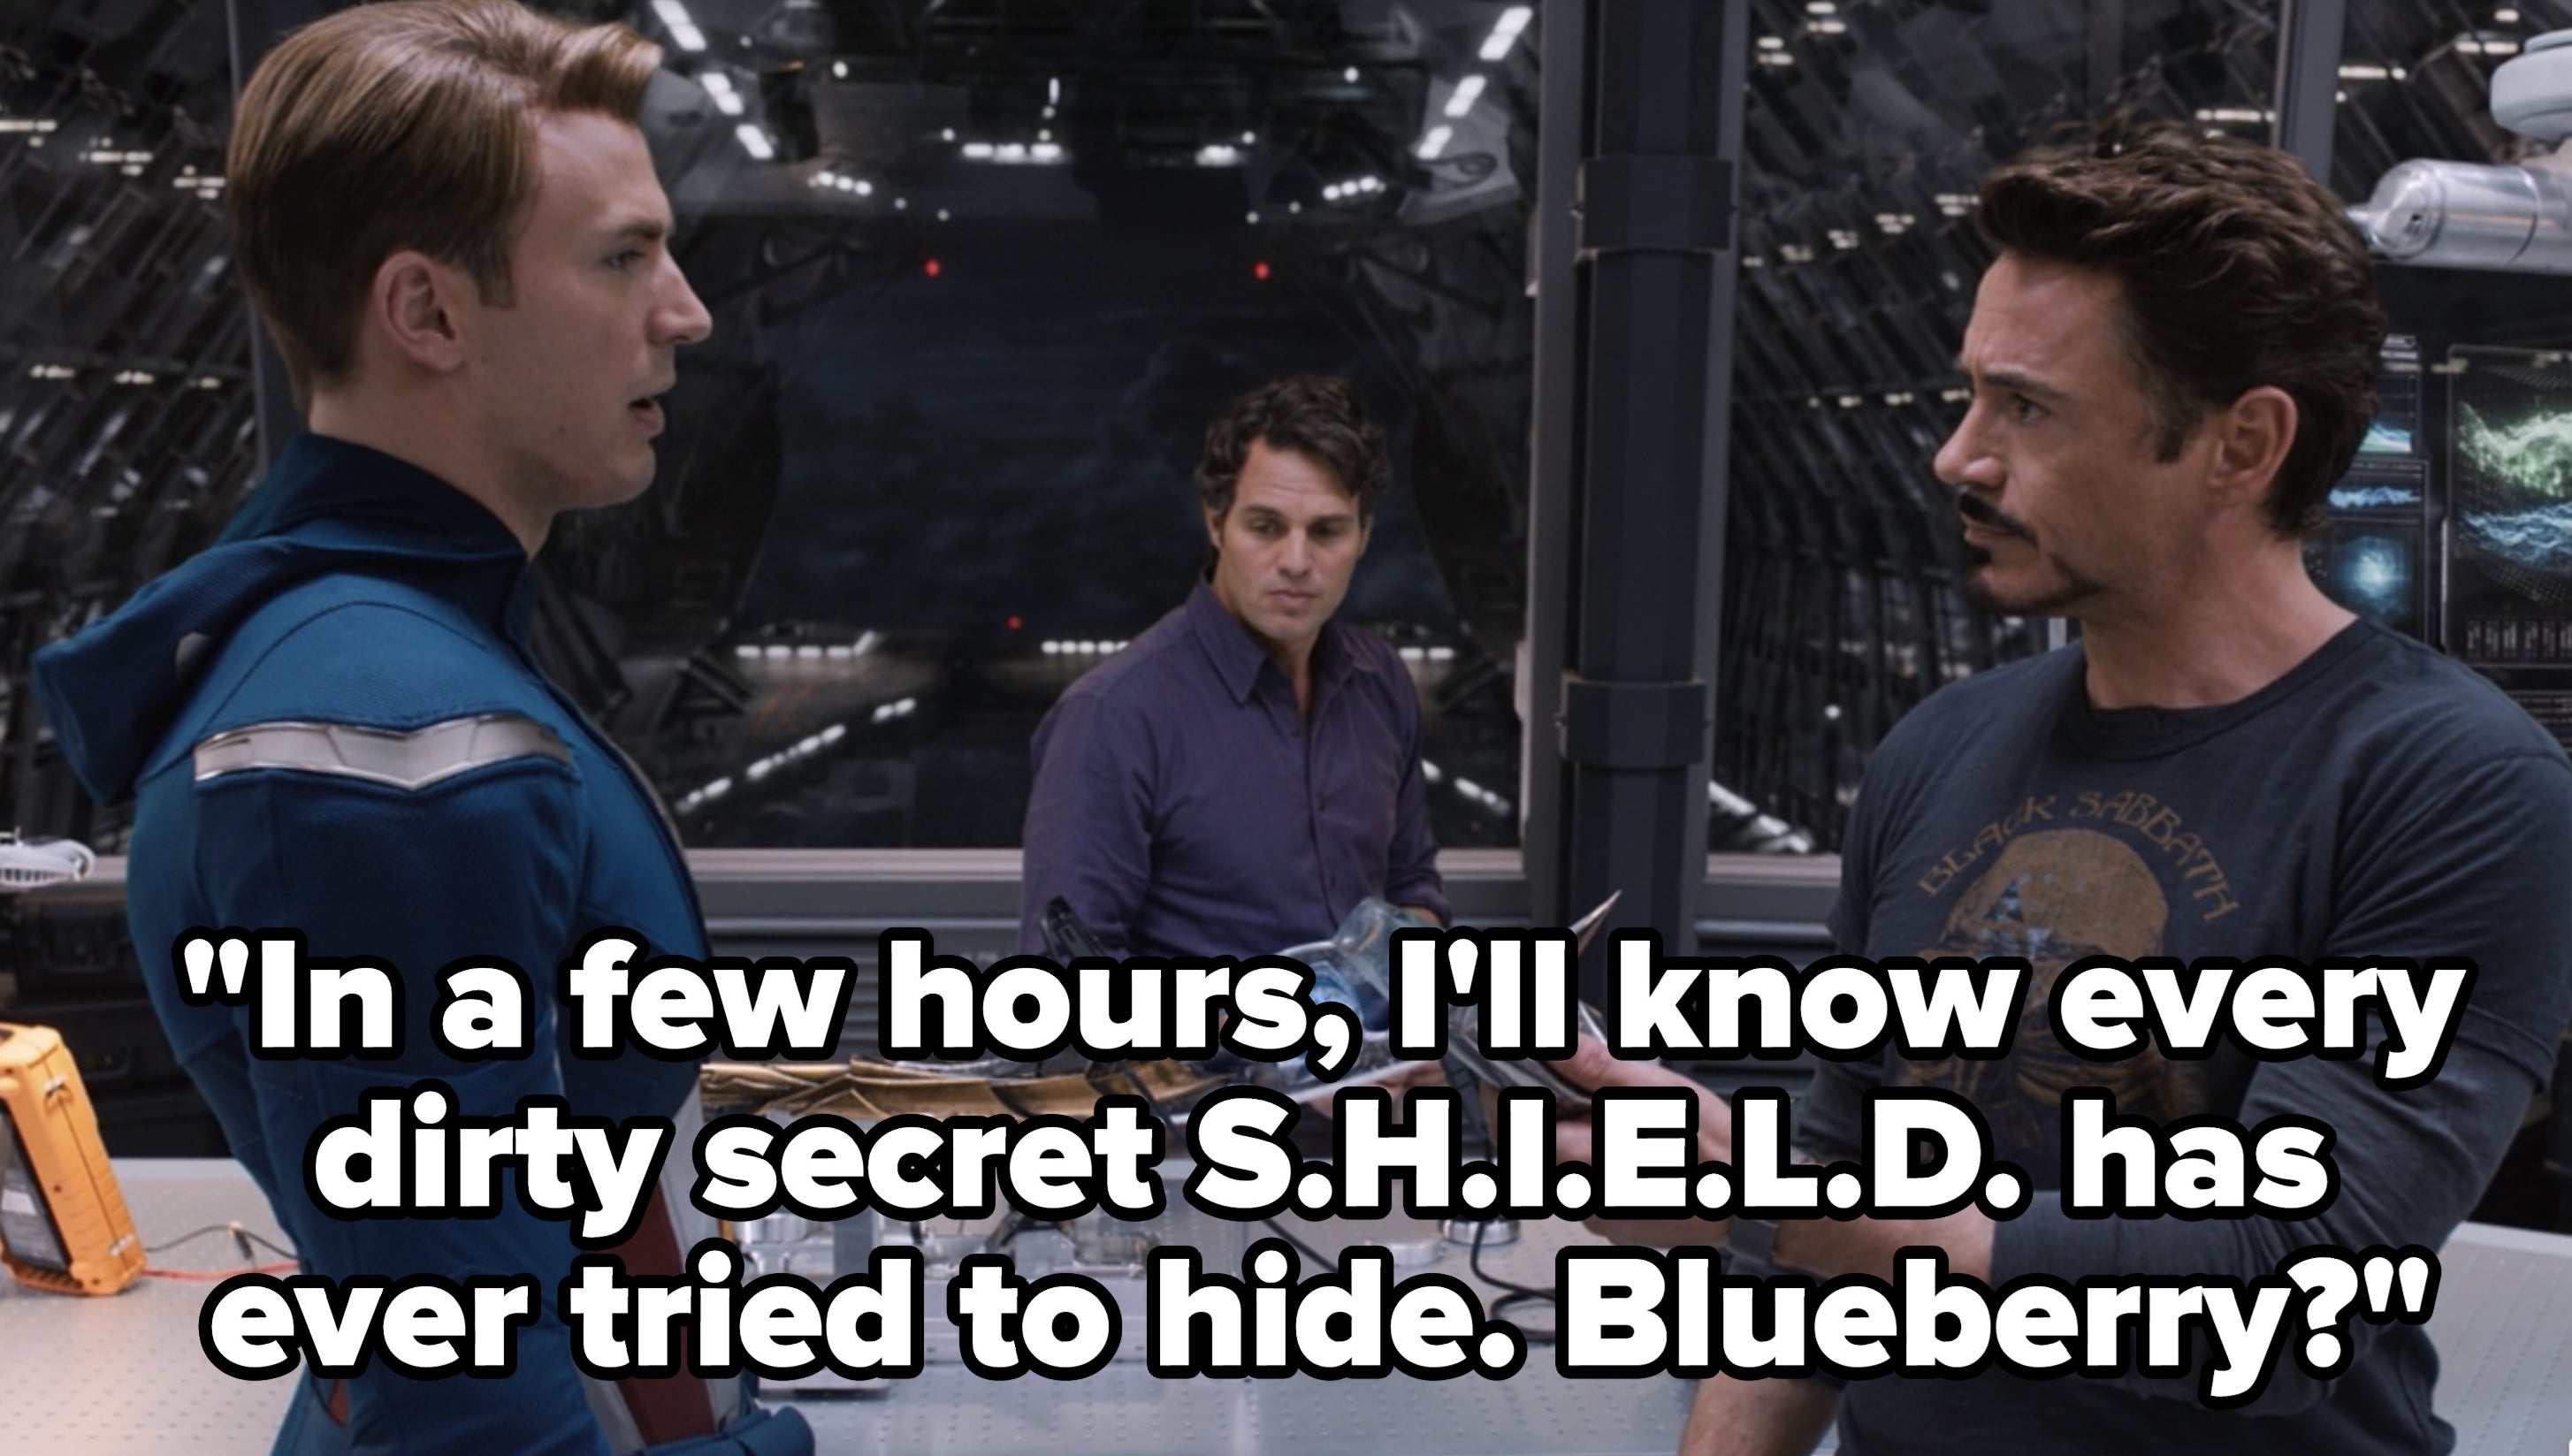 Tony says &quot;In a few hours, I&#x27;ll know every dirty secret S.H.I.E.L.D. has ever tried to hide. Blueberry?&quot; to Steve